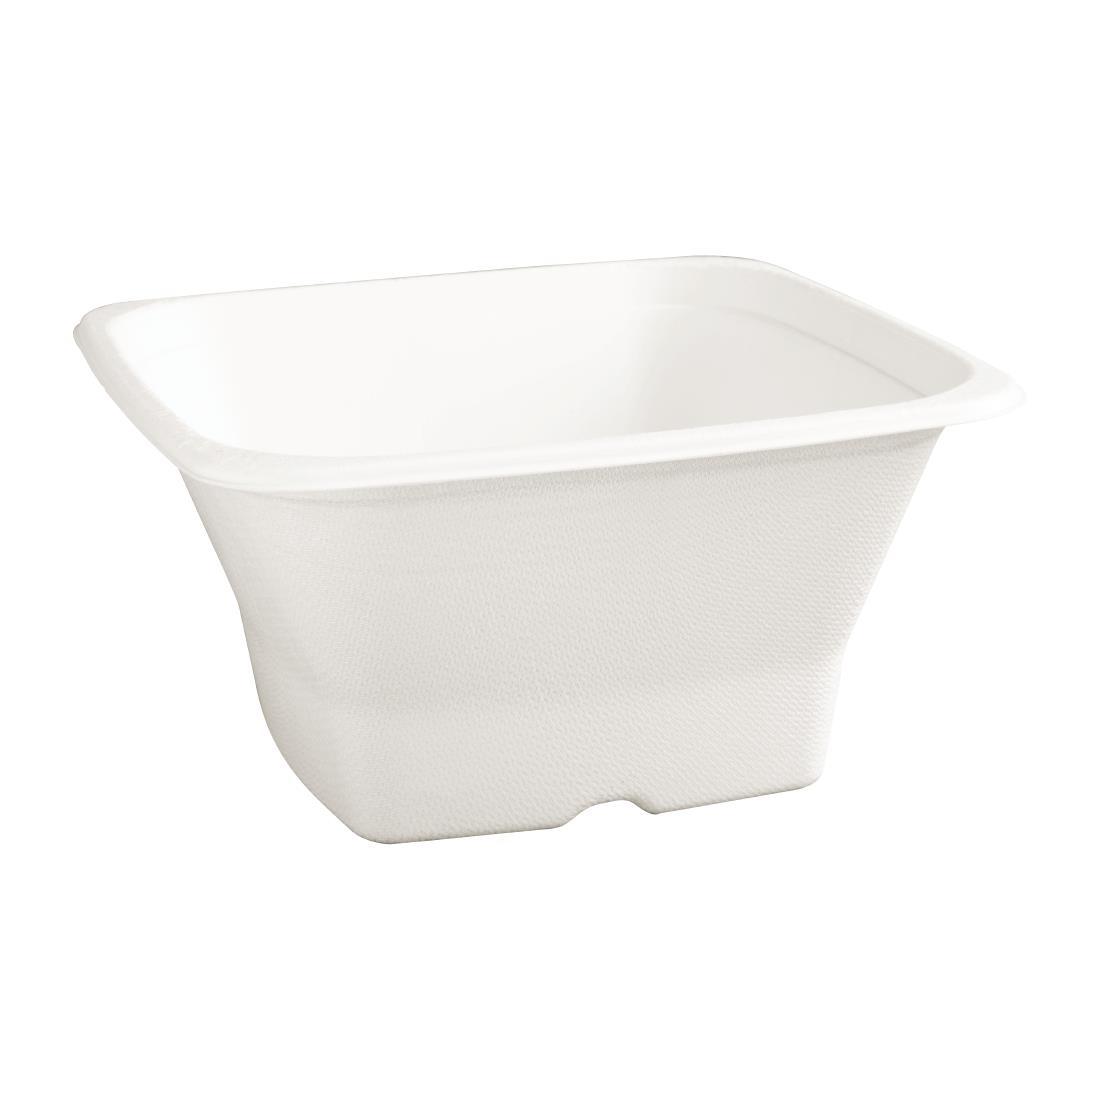 Fiesta Compostable Bagasse Square Bowls 40oz (Pack of 50) - FC538  - 2